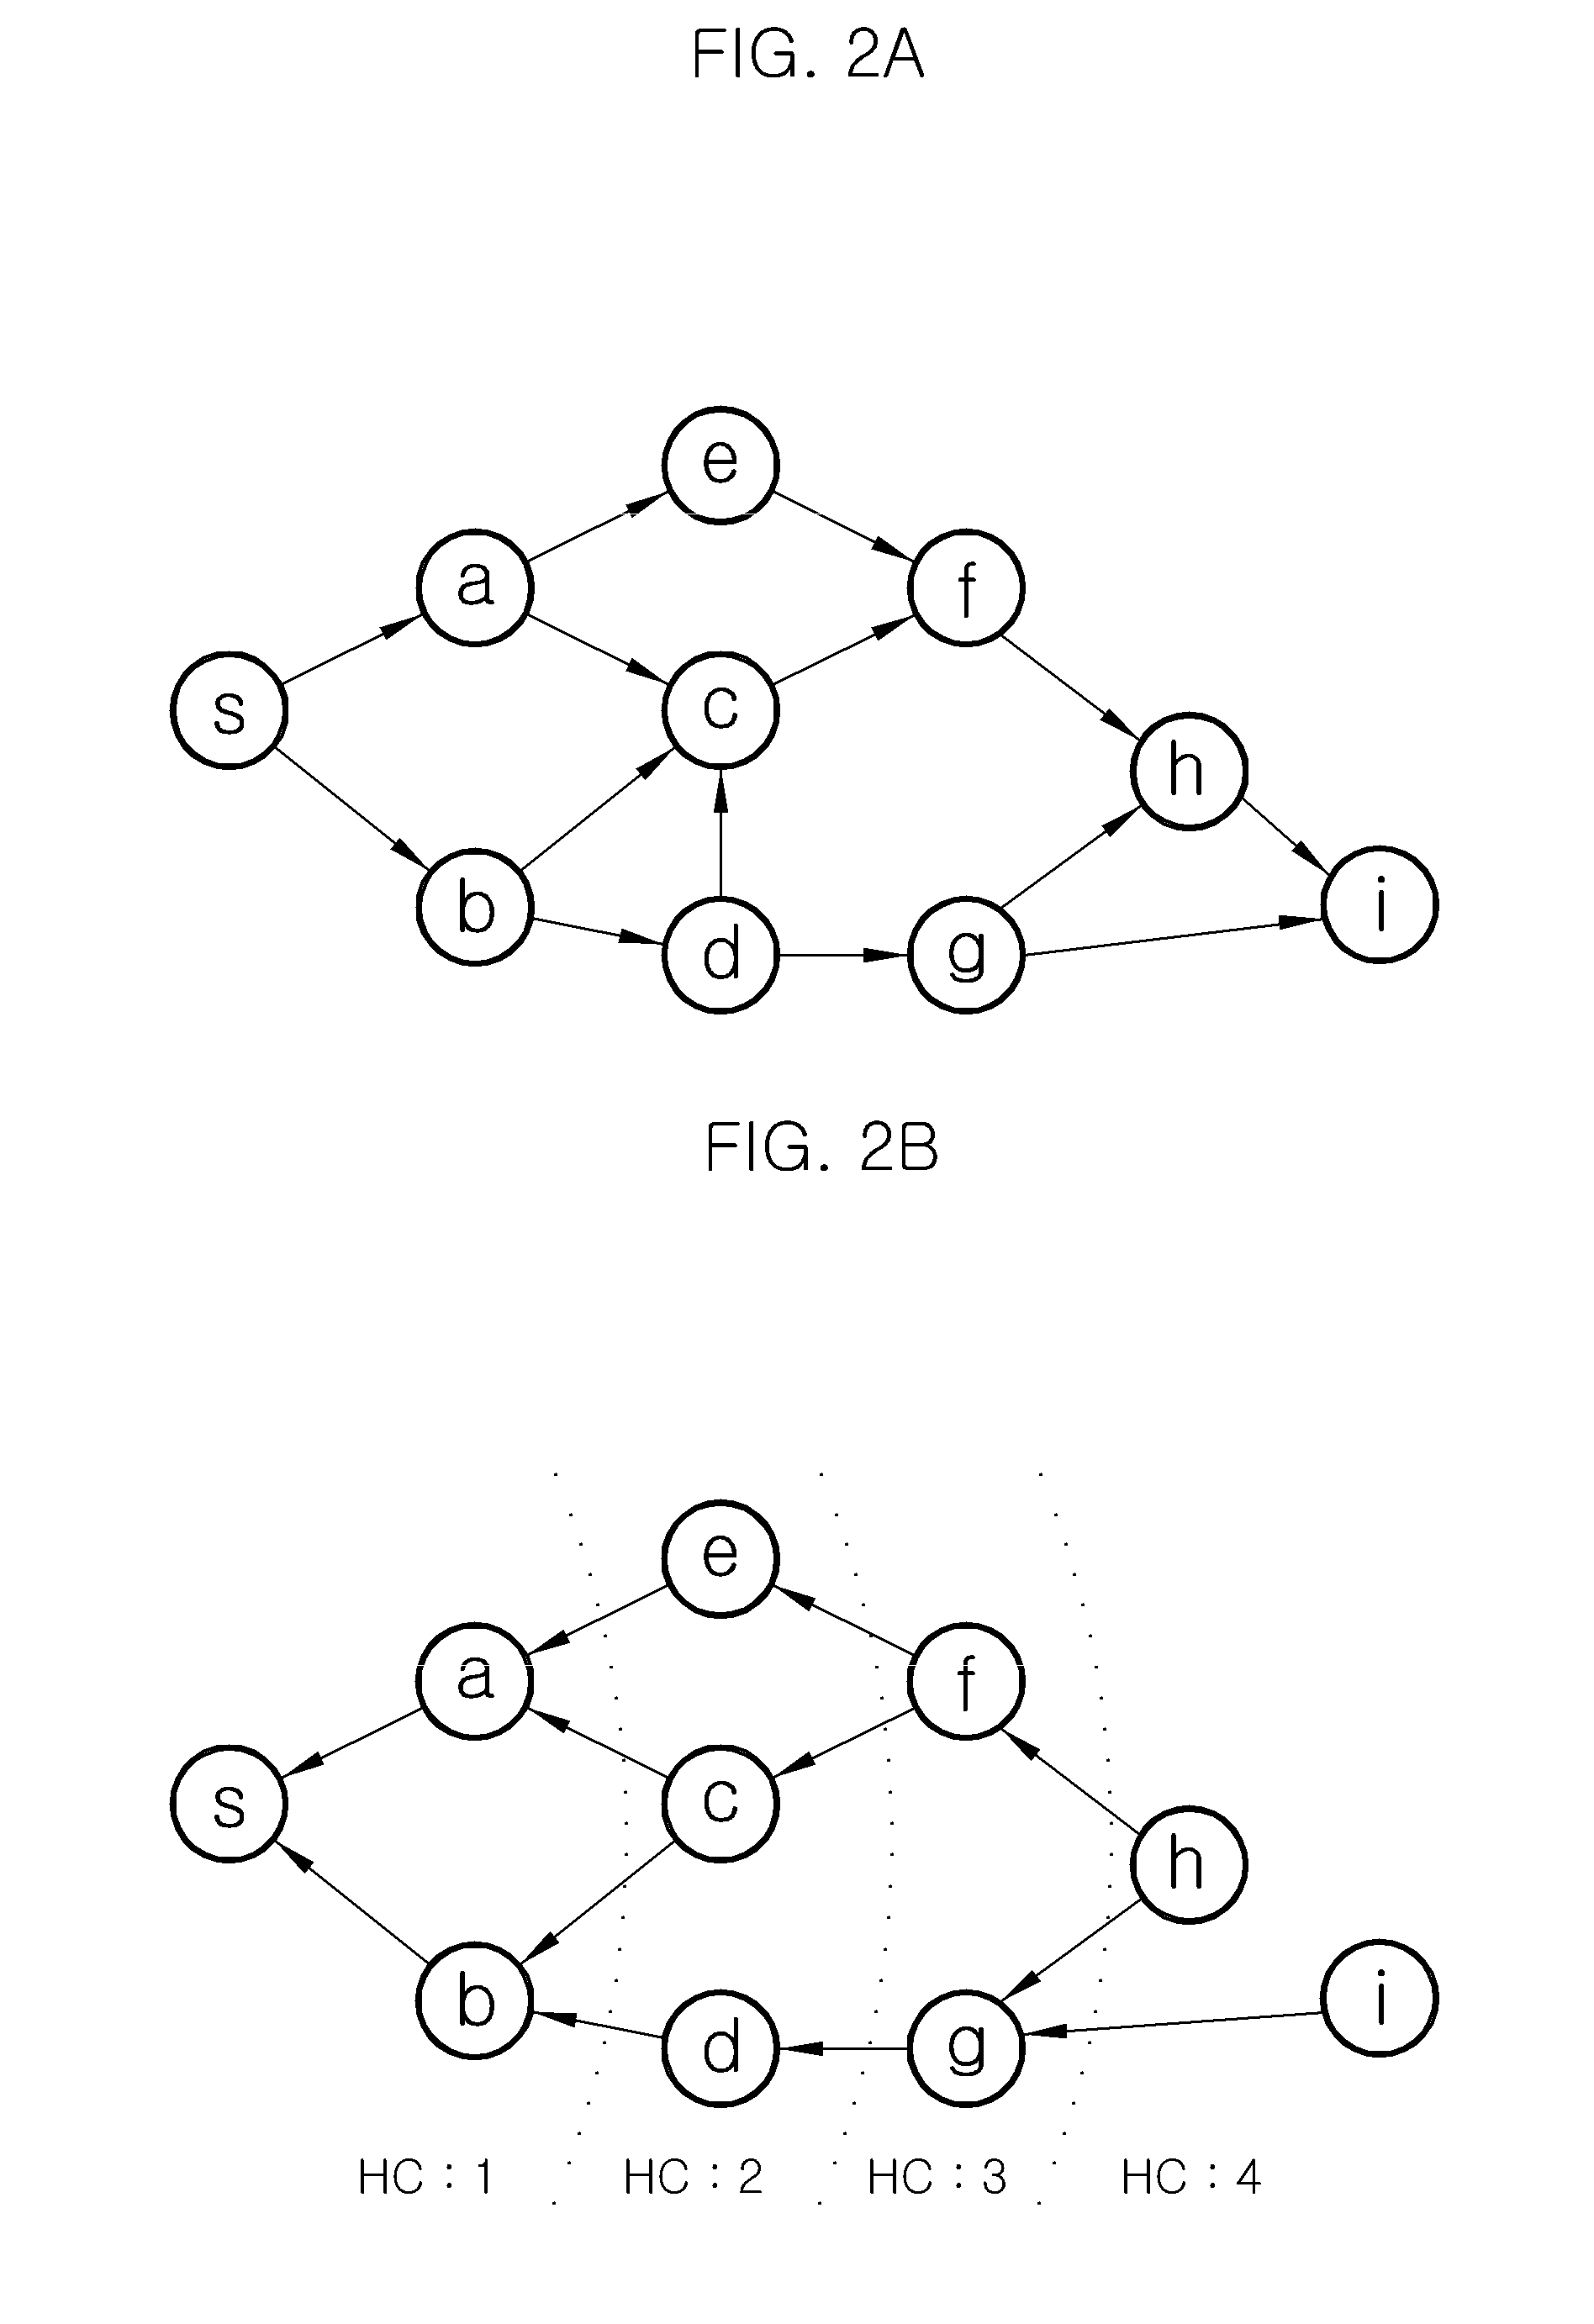 Method for multi-path source routing in sensor network